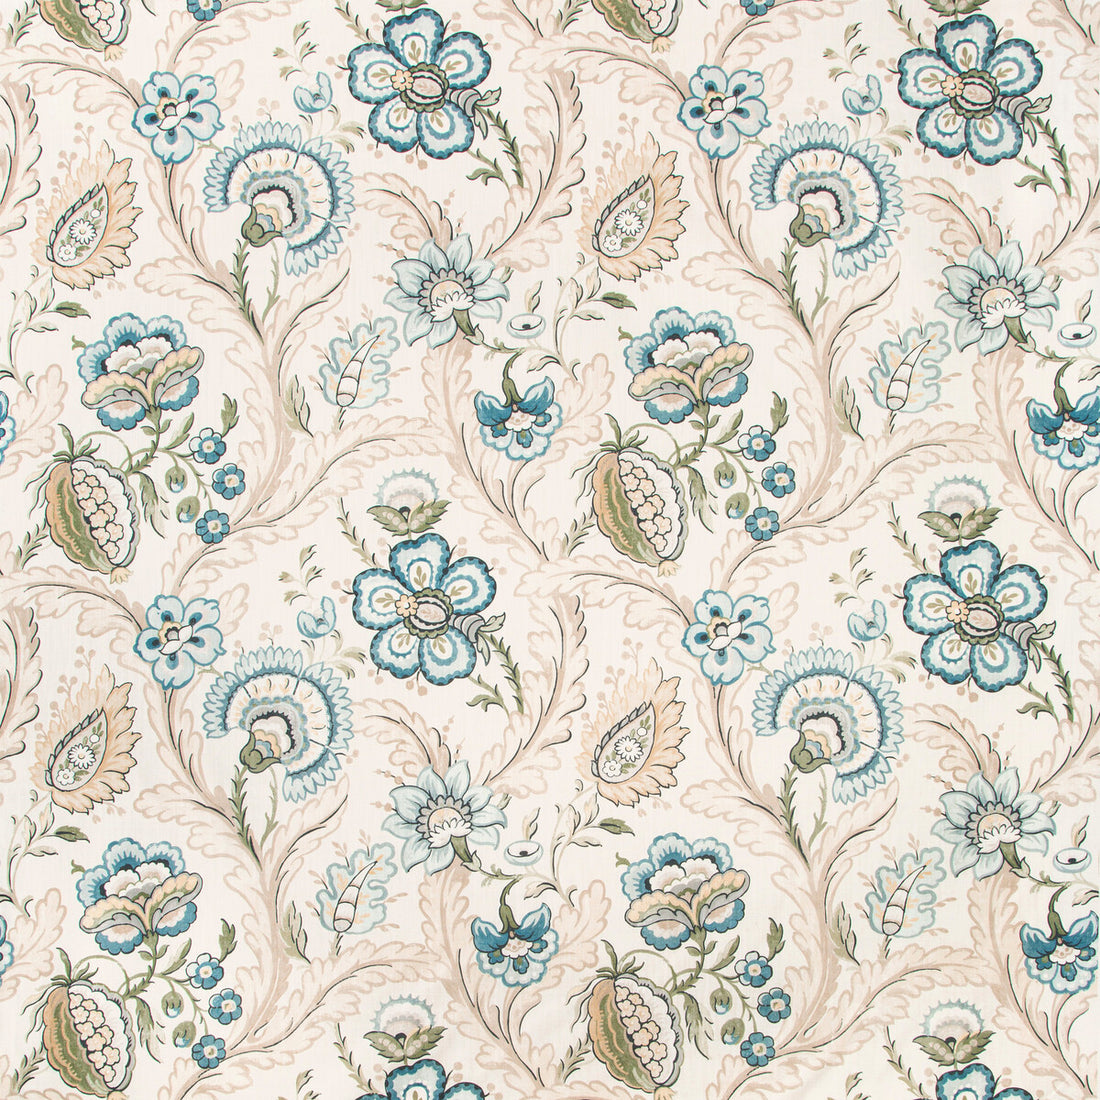 Wimberly Print fabric in blue/spring color - pattern 2020186.530.0 - by Lee Jofa in the Avondale collection